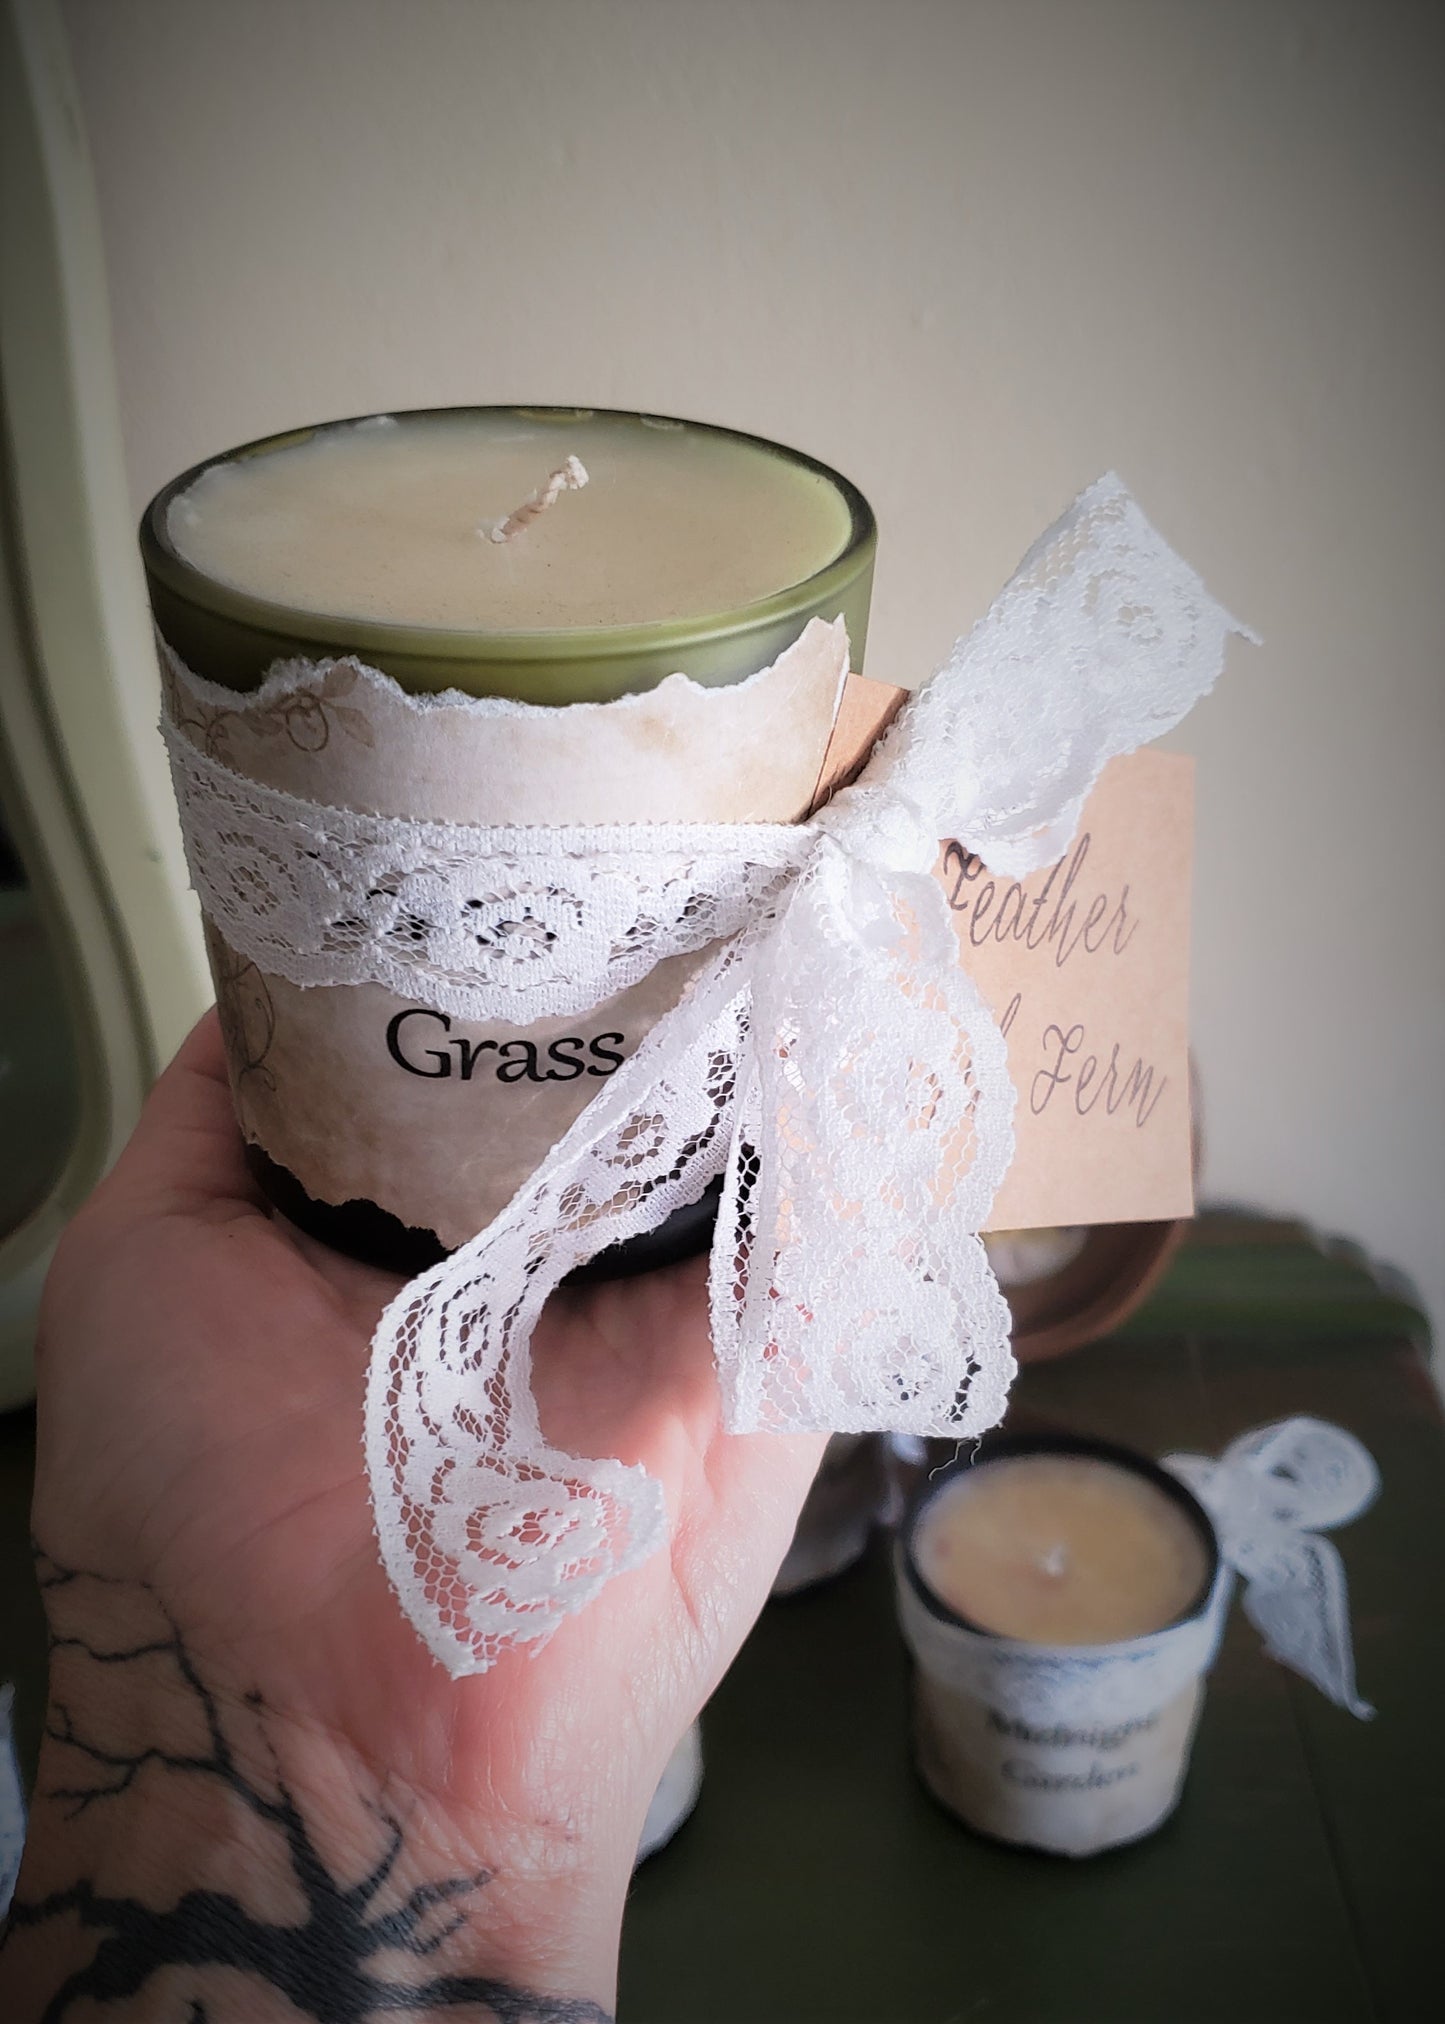 "Cemetary Grass" Soy Candle With Hand Torn Label, Lynden Blossom